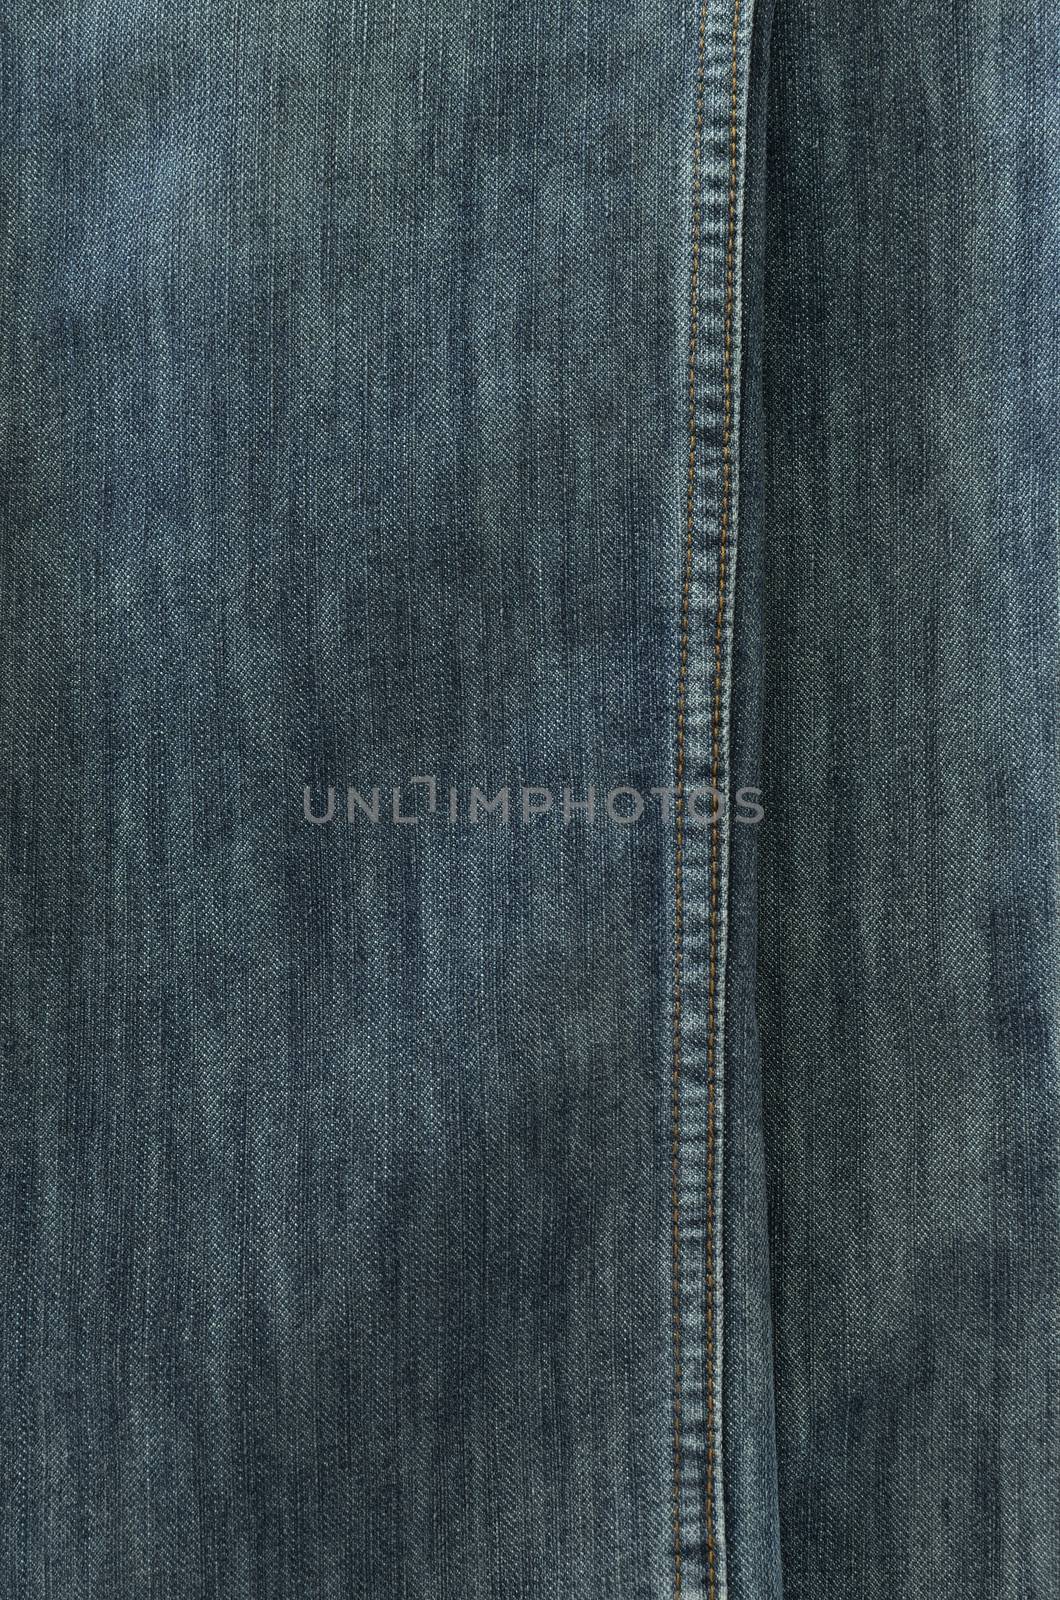 Jeans texture with seams for background